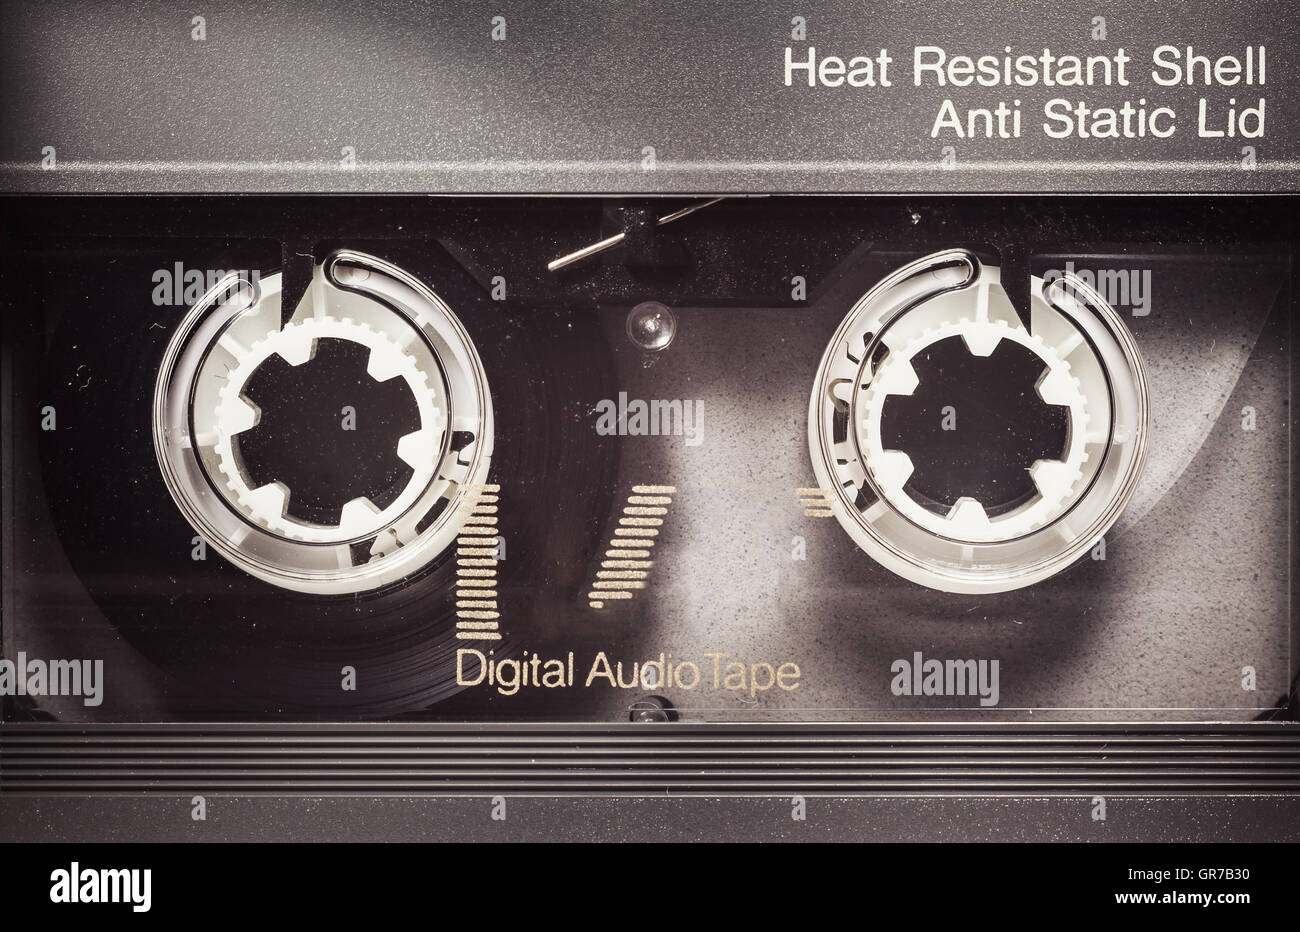 Details of an old dusty digital audio tape, retro technology from the 90's. Stock Photo